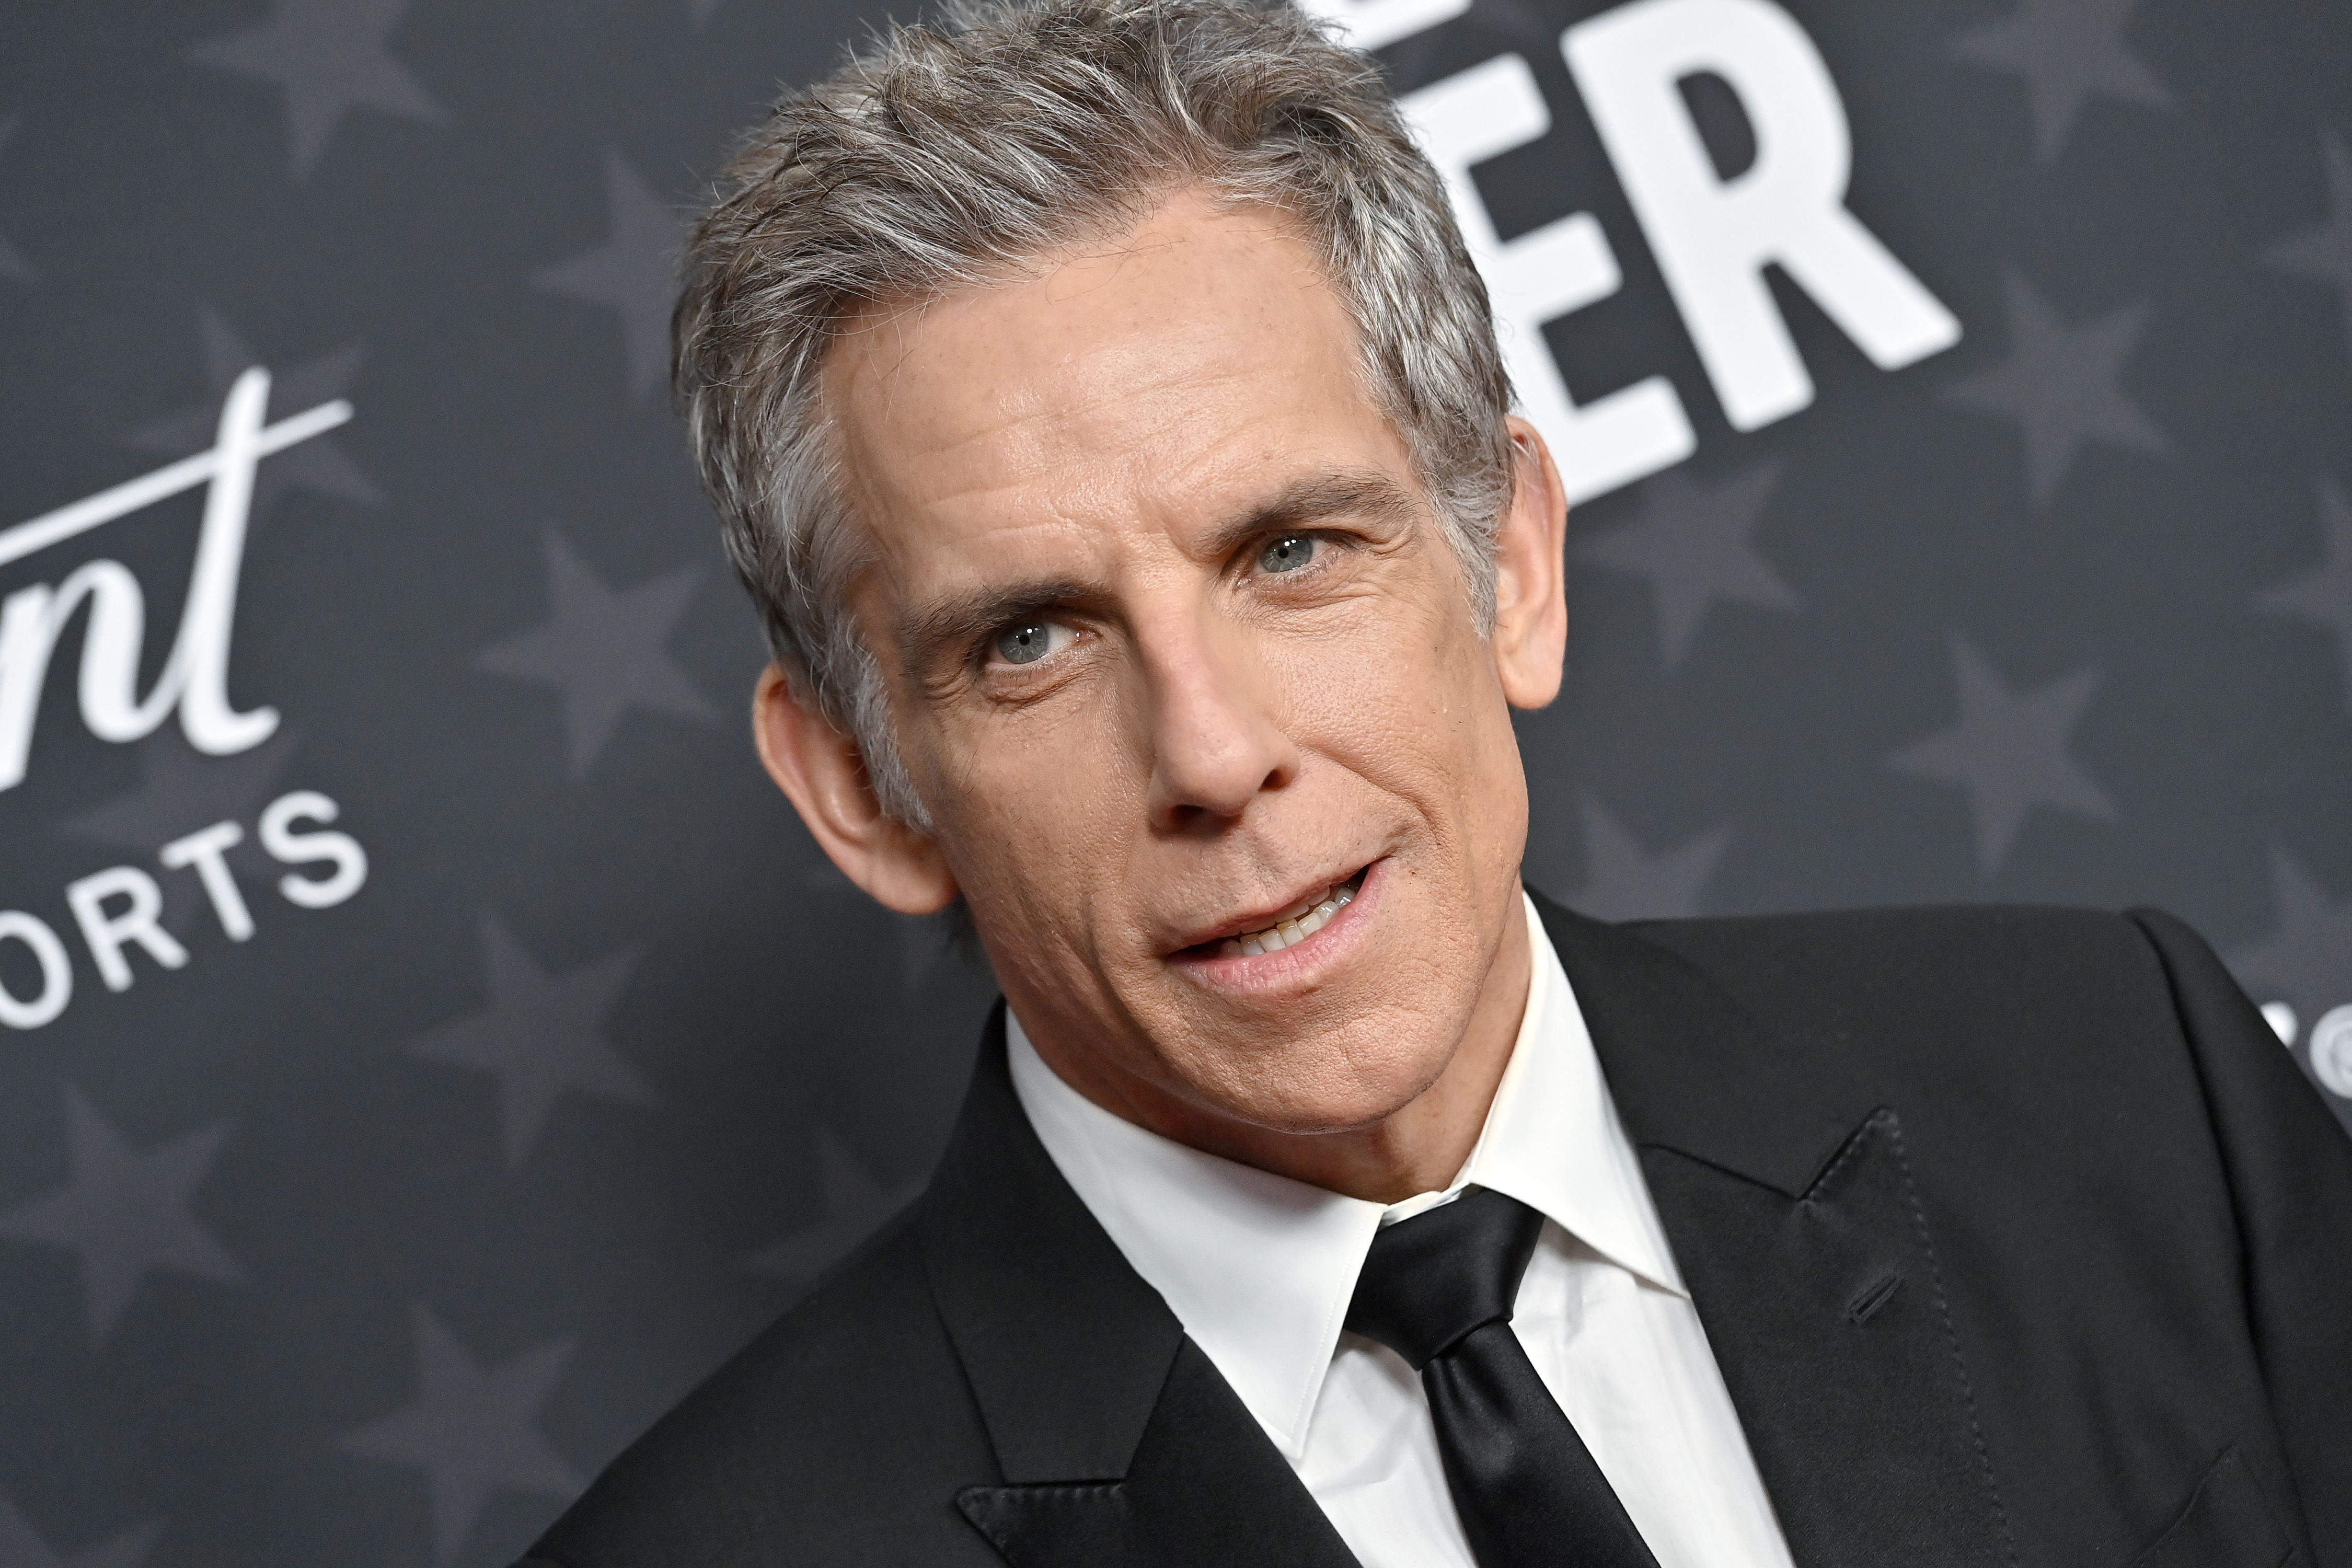 Ben Stiller attends the 28th Annual Critics Choice Awards at Fairmont Century Plaza in Los Angeles, California